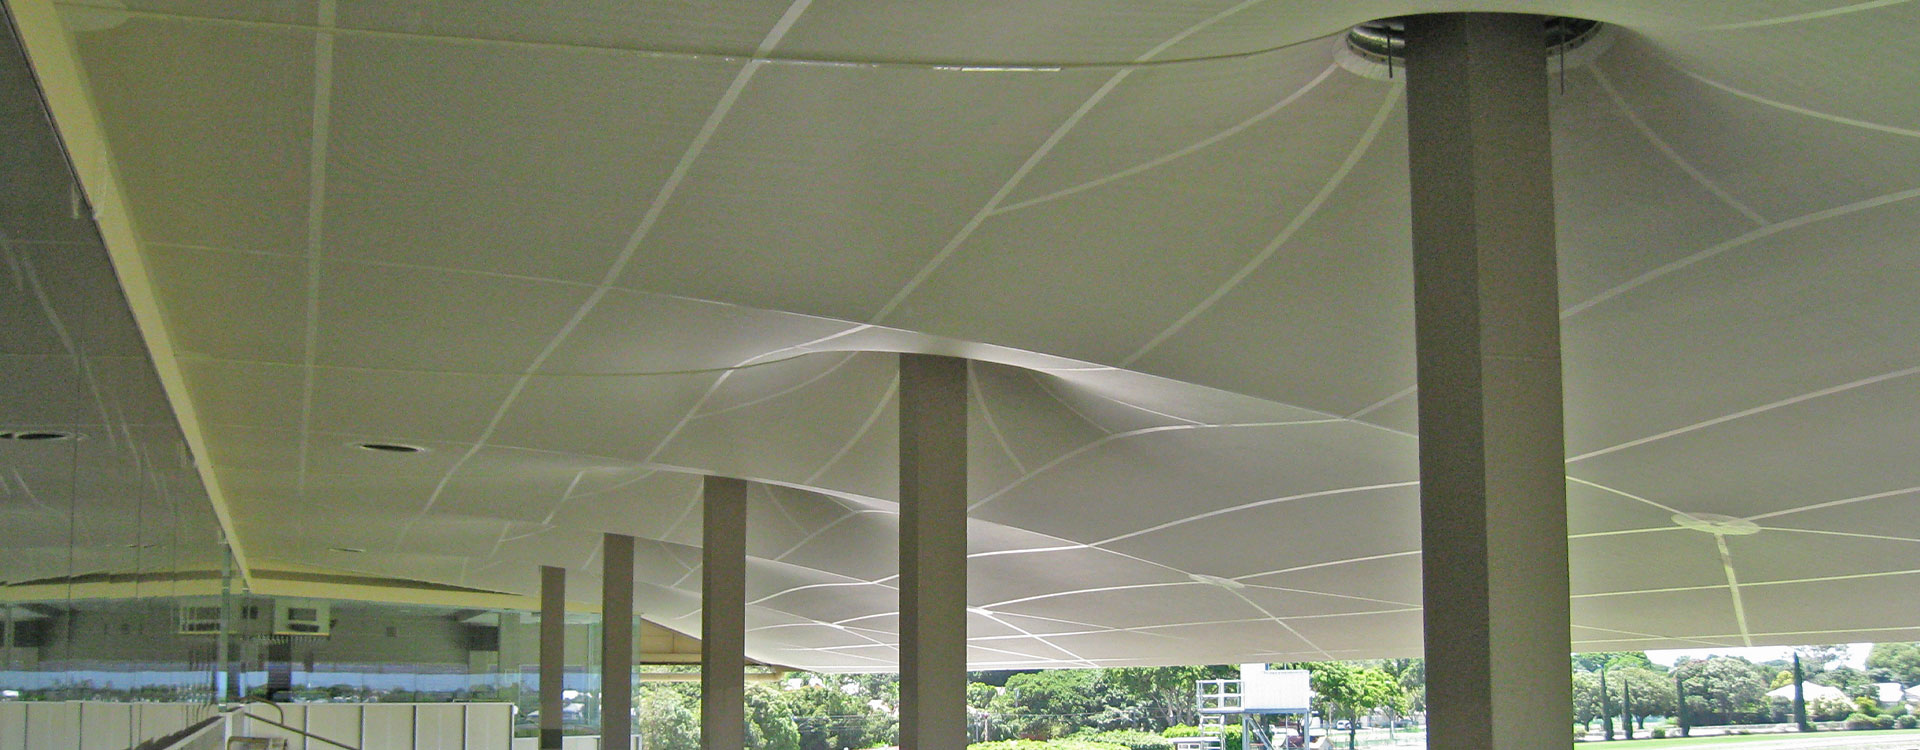 John Power Stand Fabric Ceiling